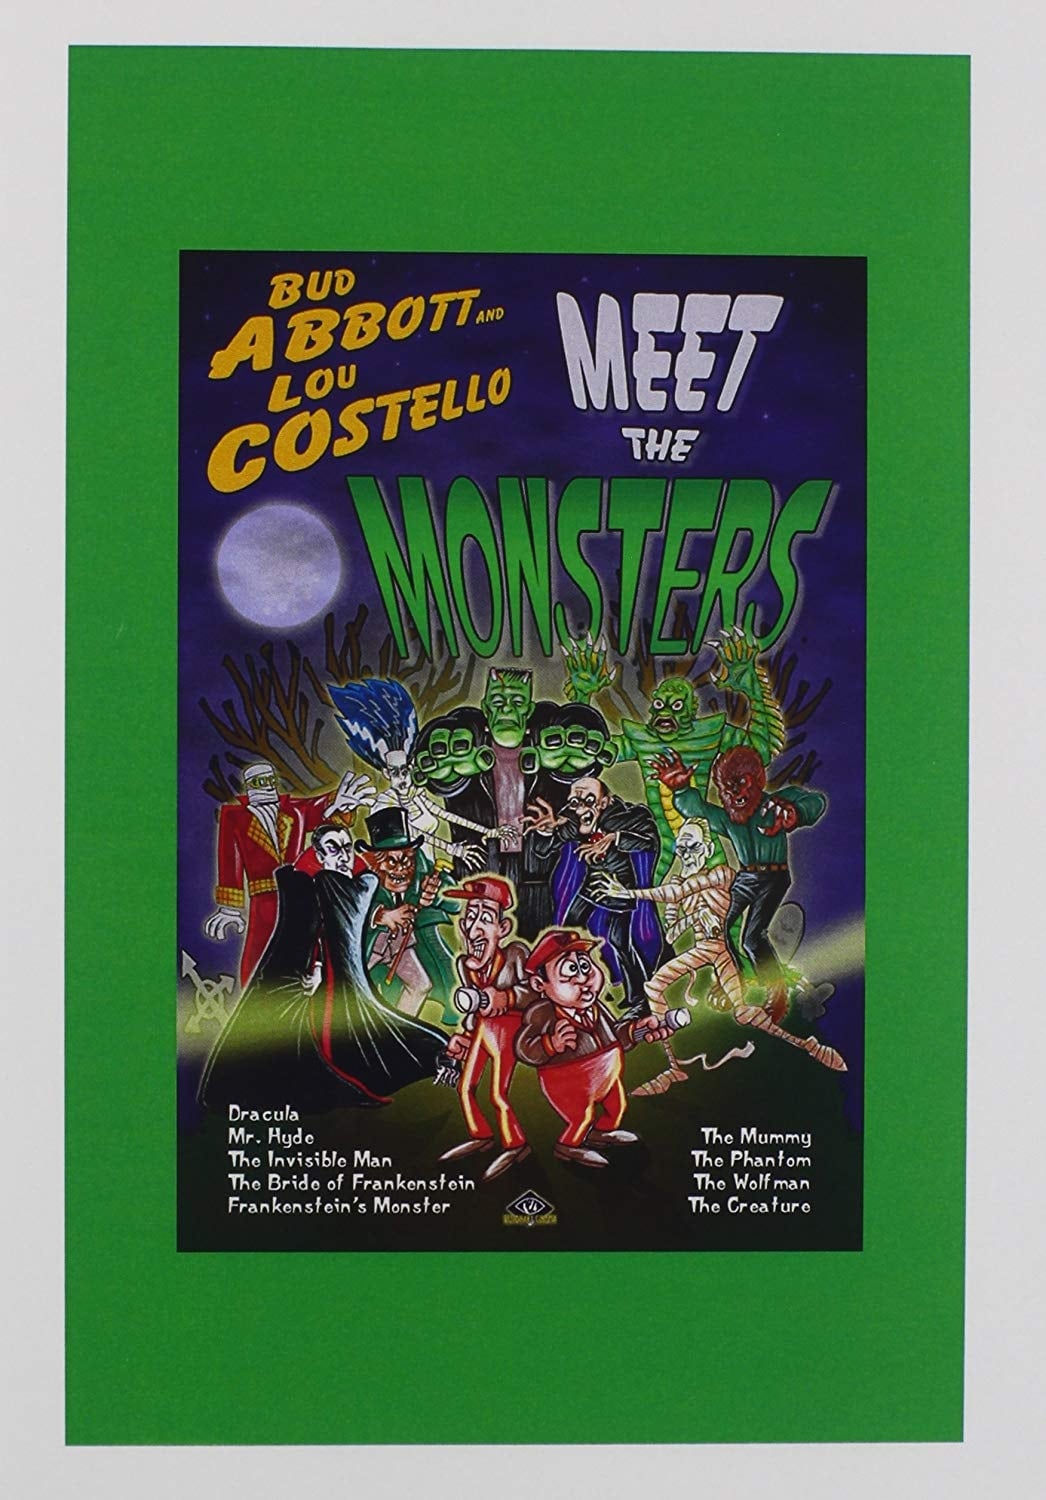 Abbott and Costello Meet the Monsters!